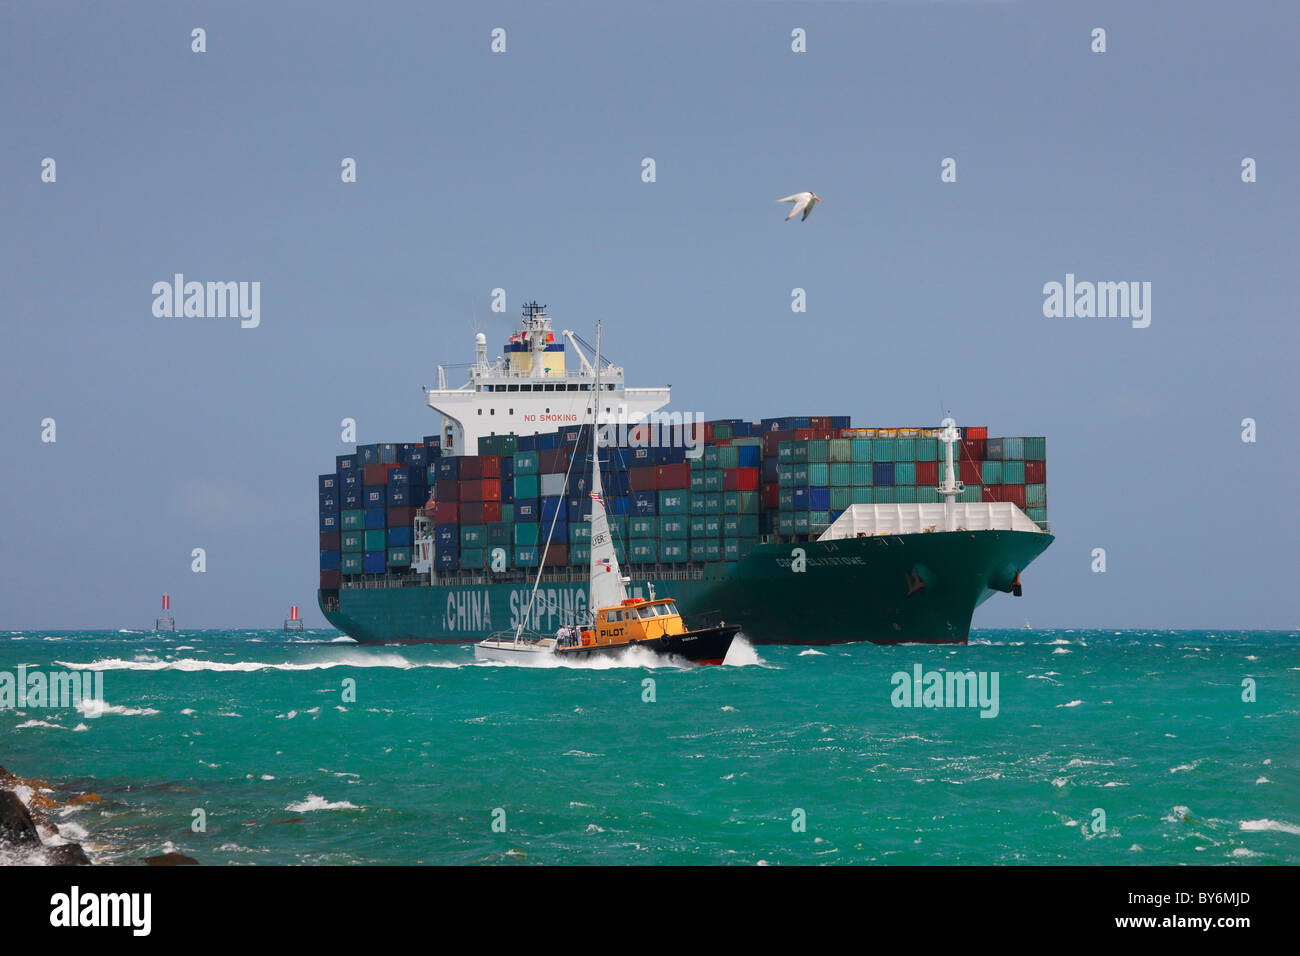 Cargo container ship approaches Port of Miami. Stock Photo